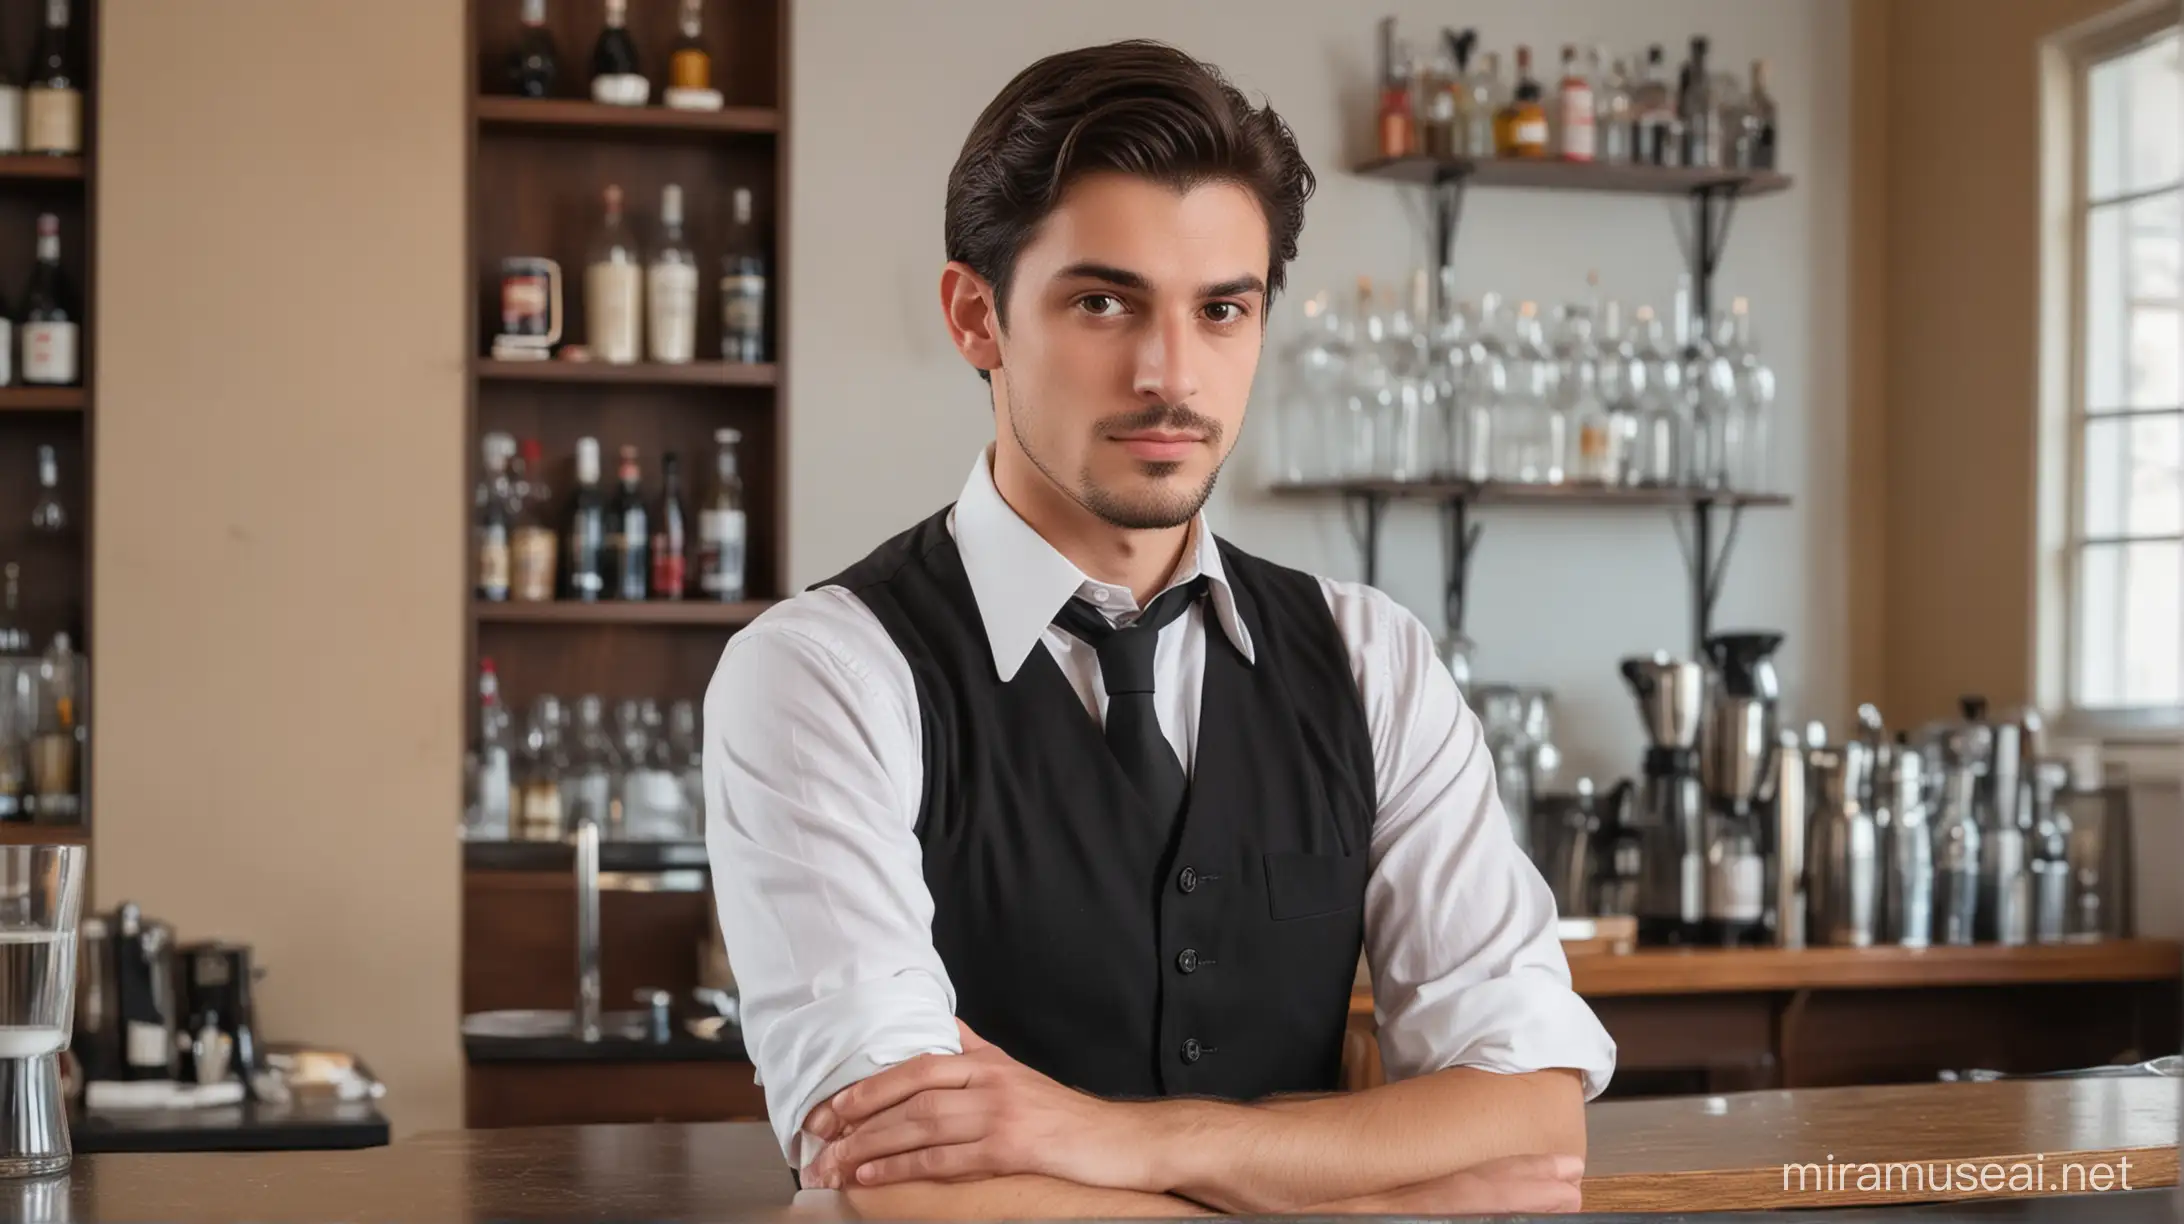 Bored Waiter Standing Behind Caf Bar Counter